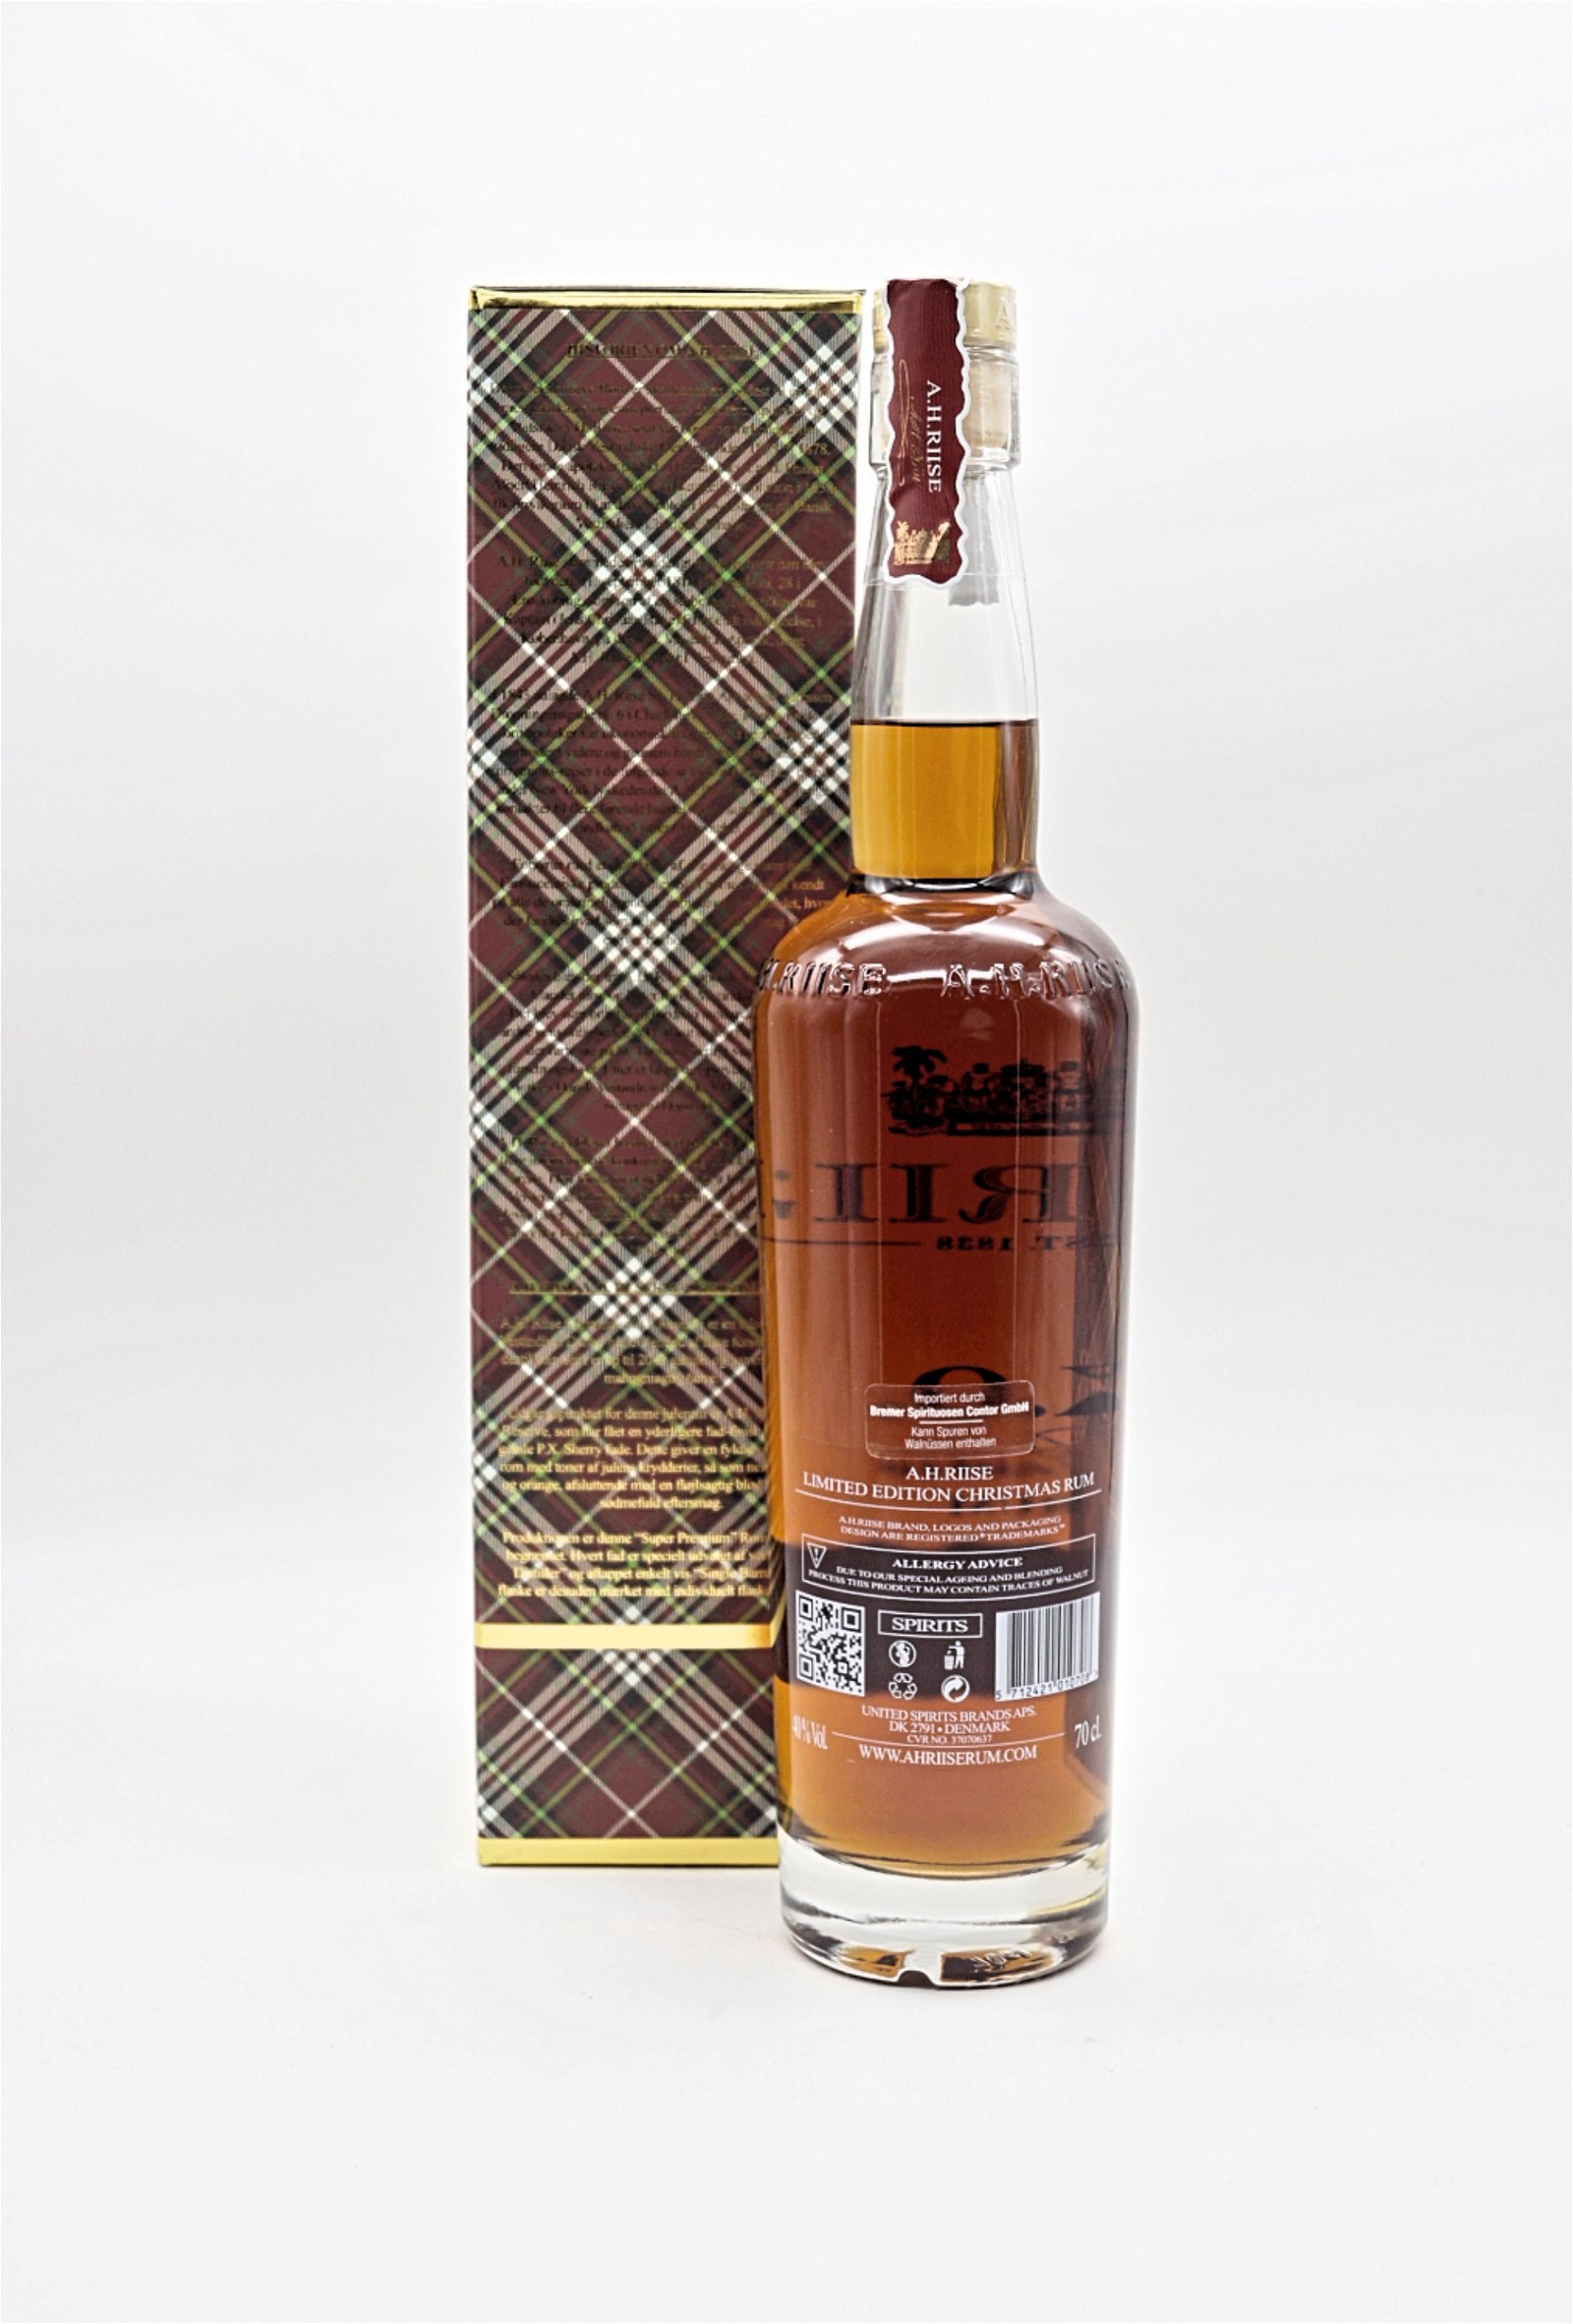 A.H. Riise XO Reserve Rum Christmas Limited Edition